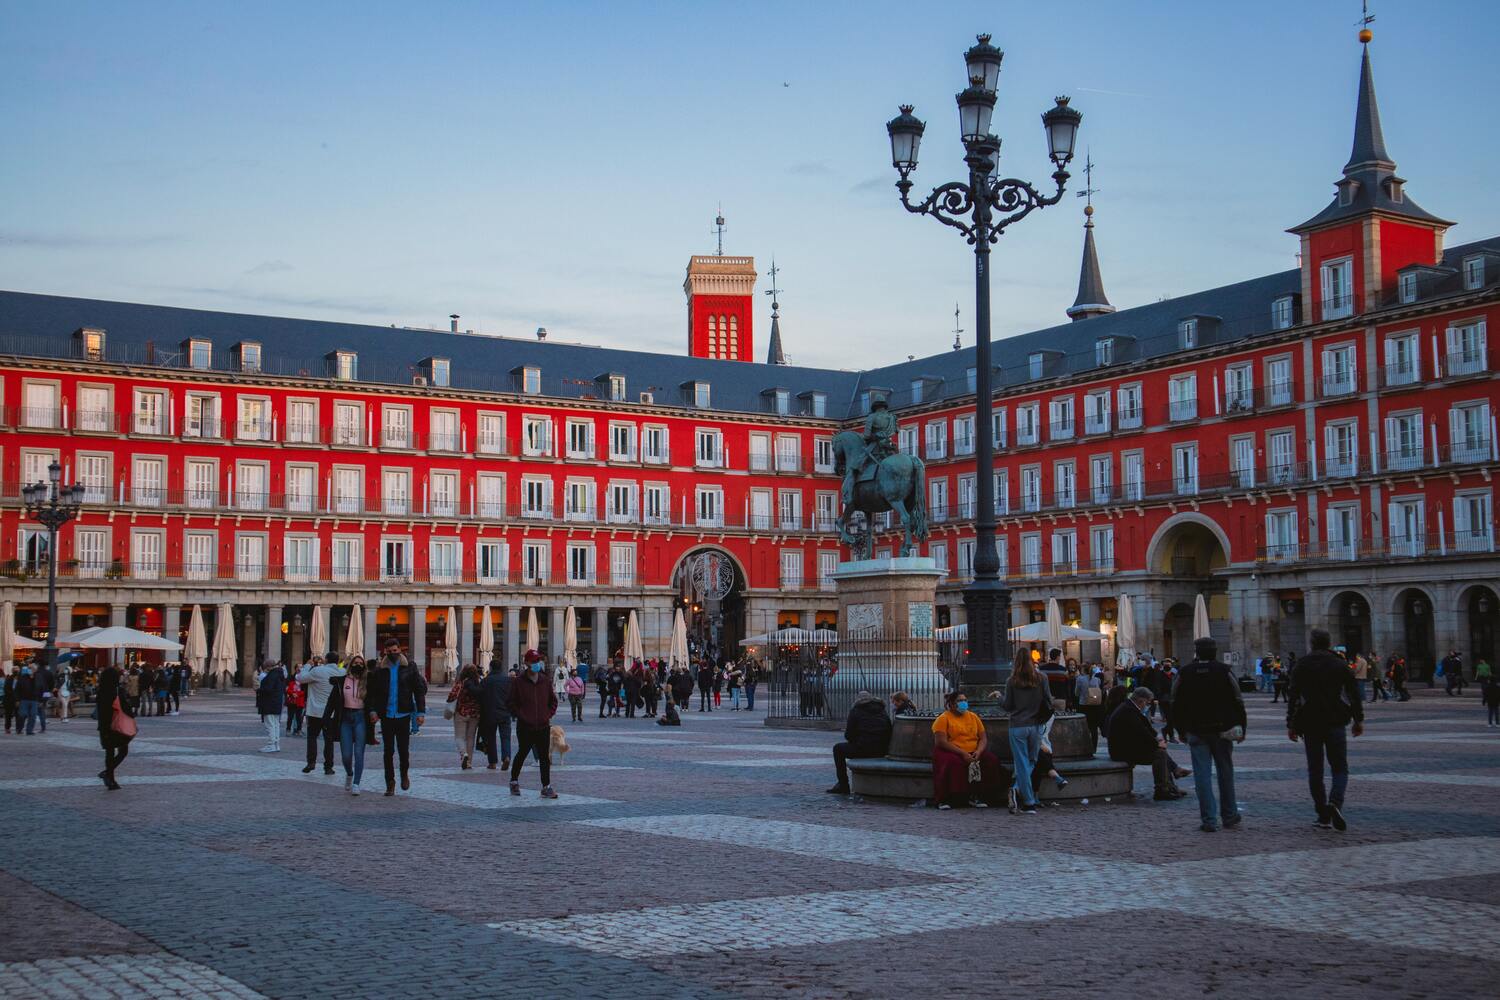 Things to do in Madrid